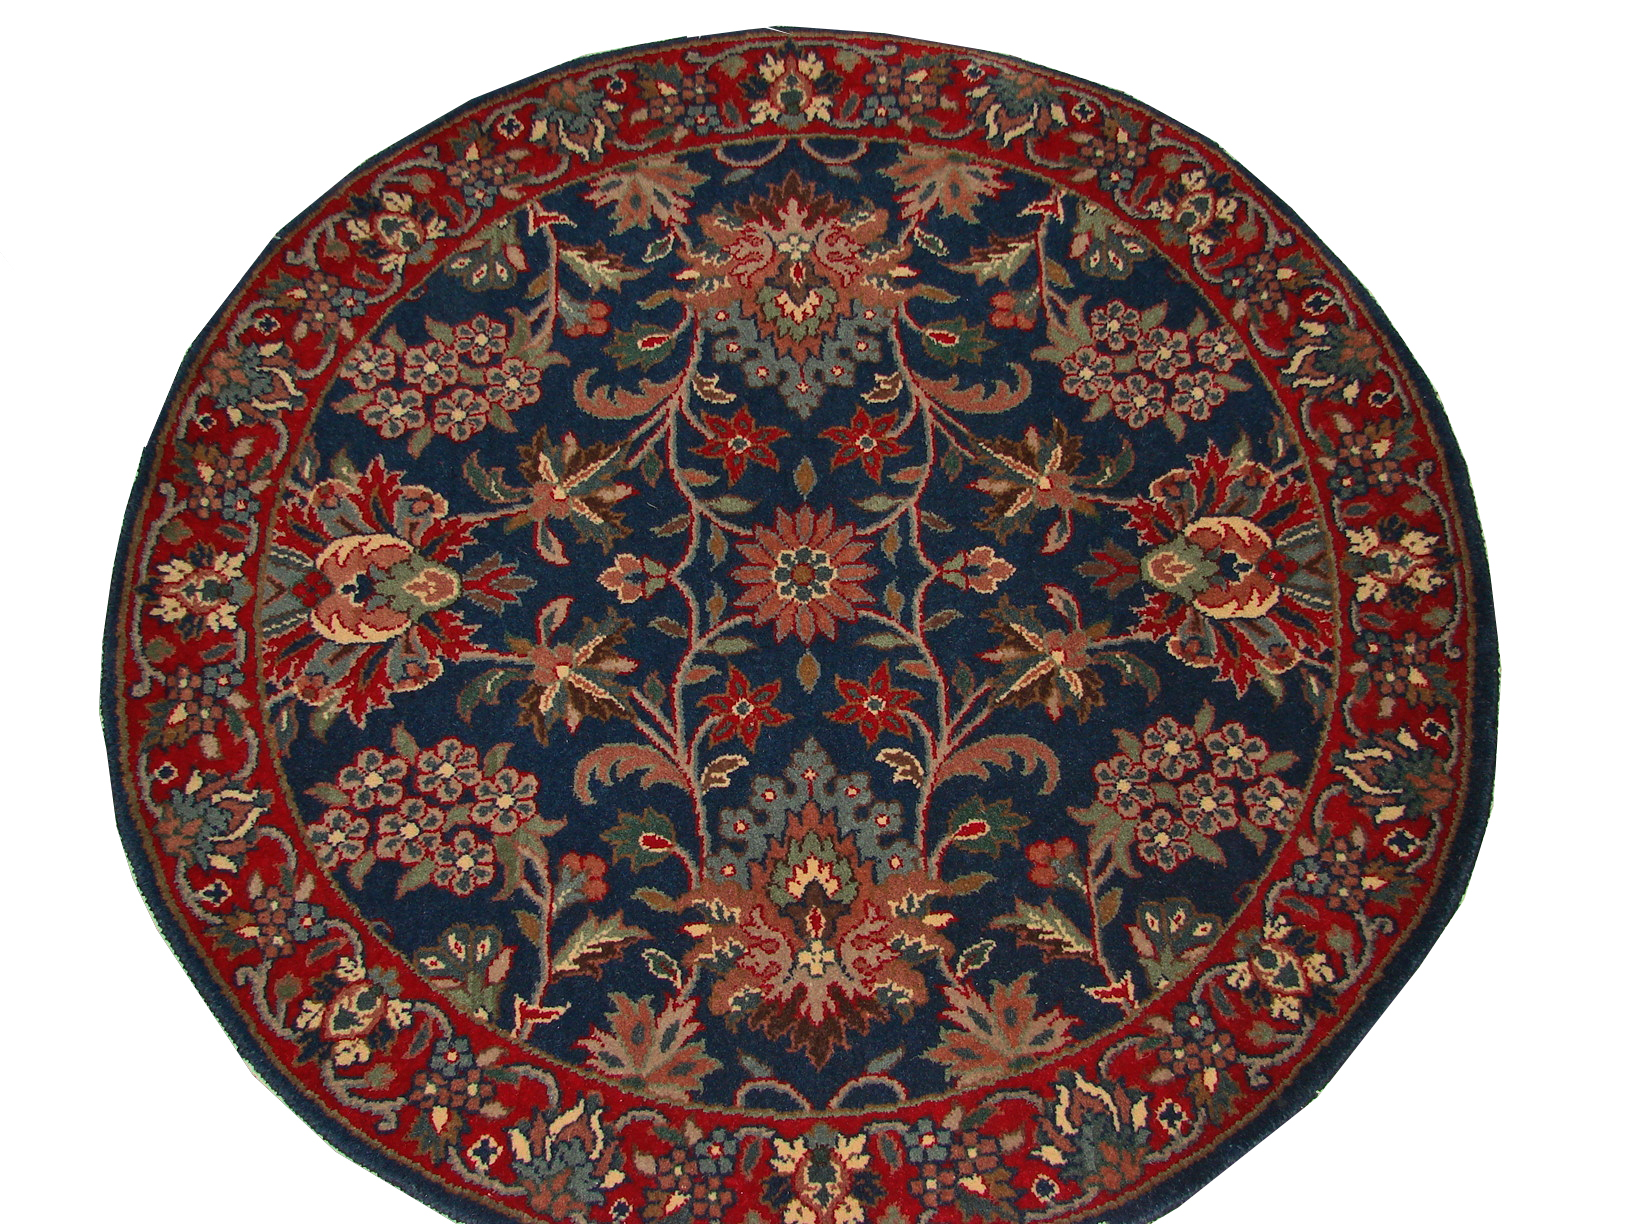 Clearance & Discount Rugs Traditional Round Rug 5022 Medium Blue - Navy & Red - Burgundy Hand Knotted Rug